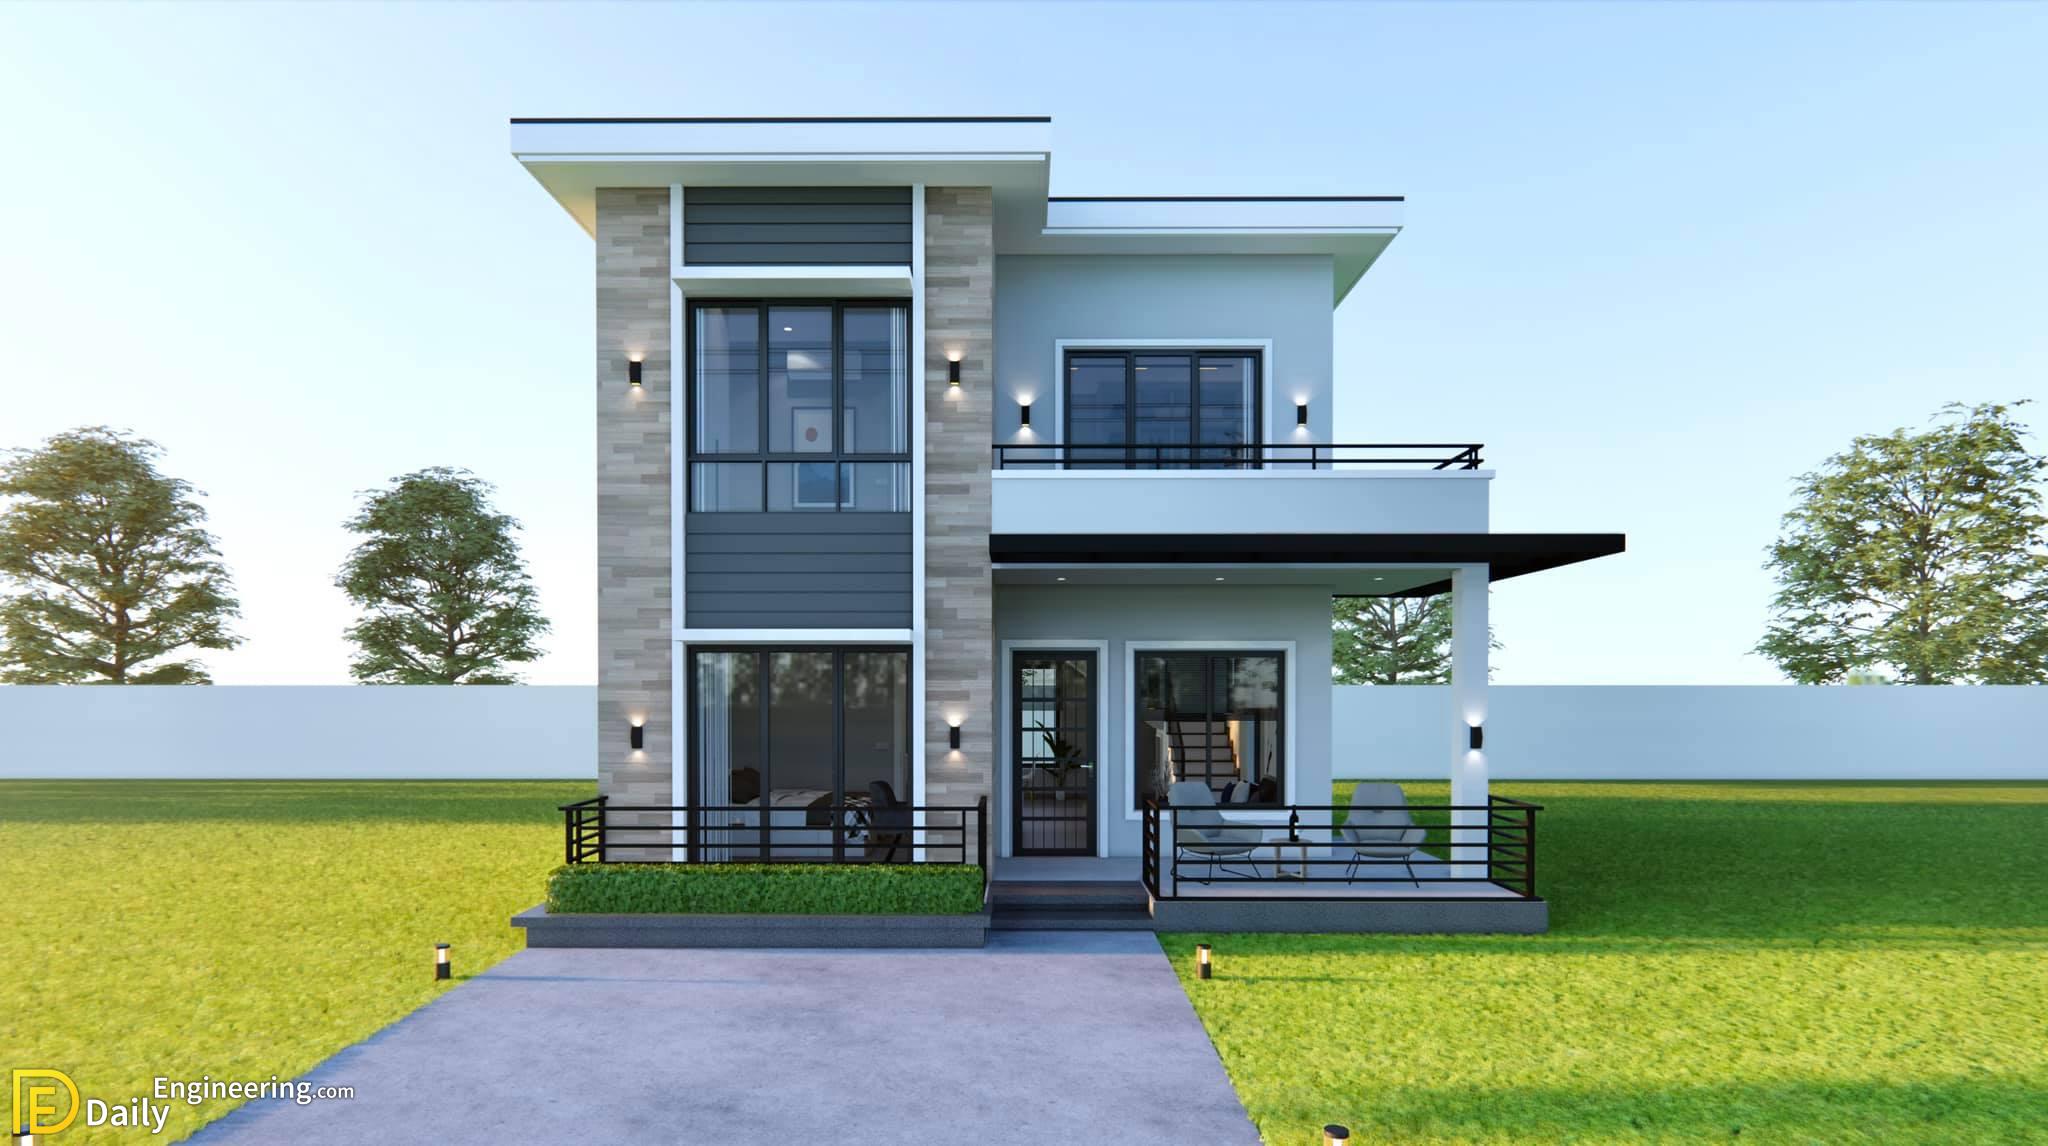 115SQ.M. Two-Storey House Design Plans 115m x 115.15m With 15 Bedrooms